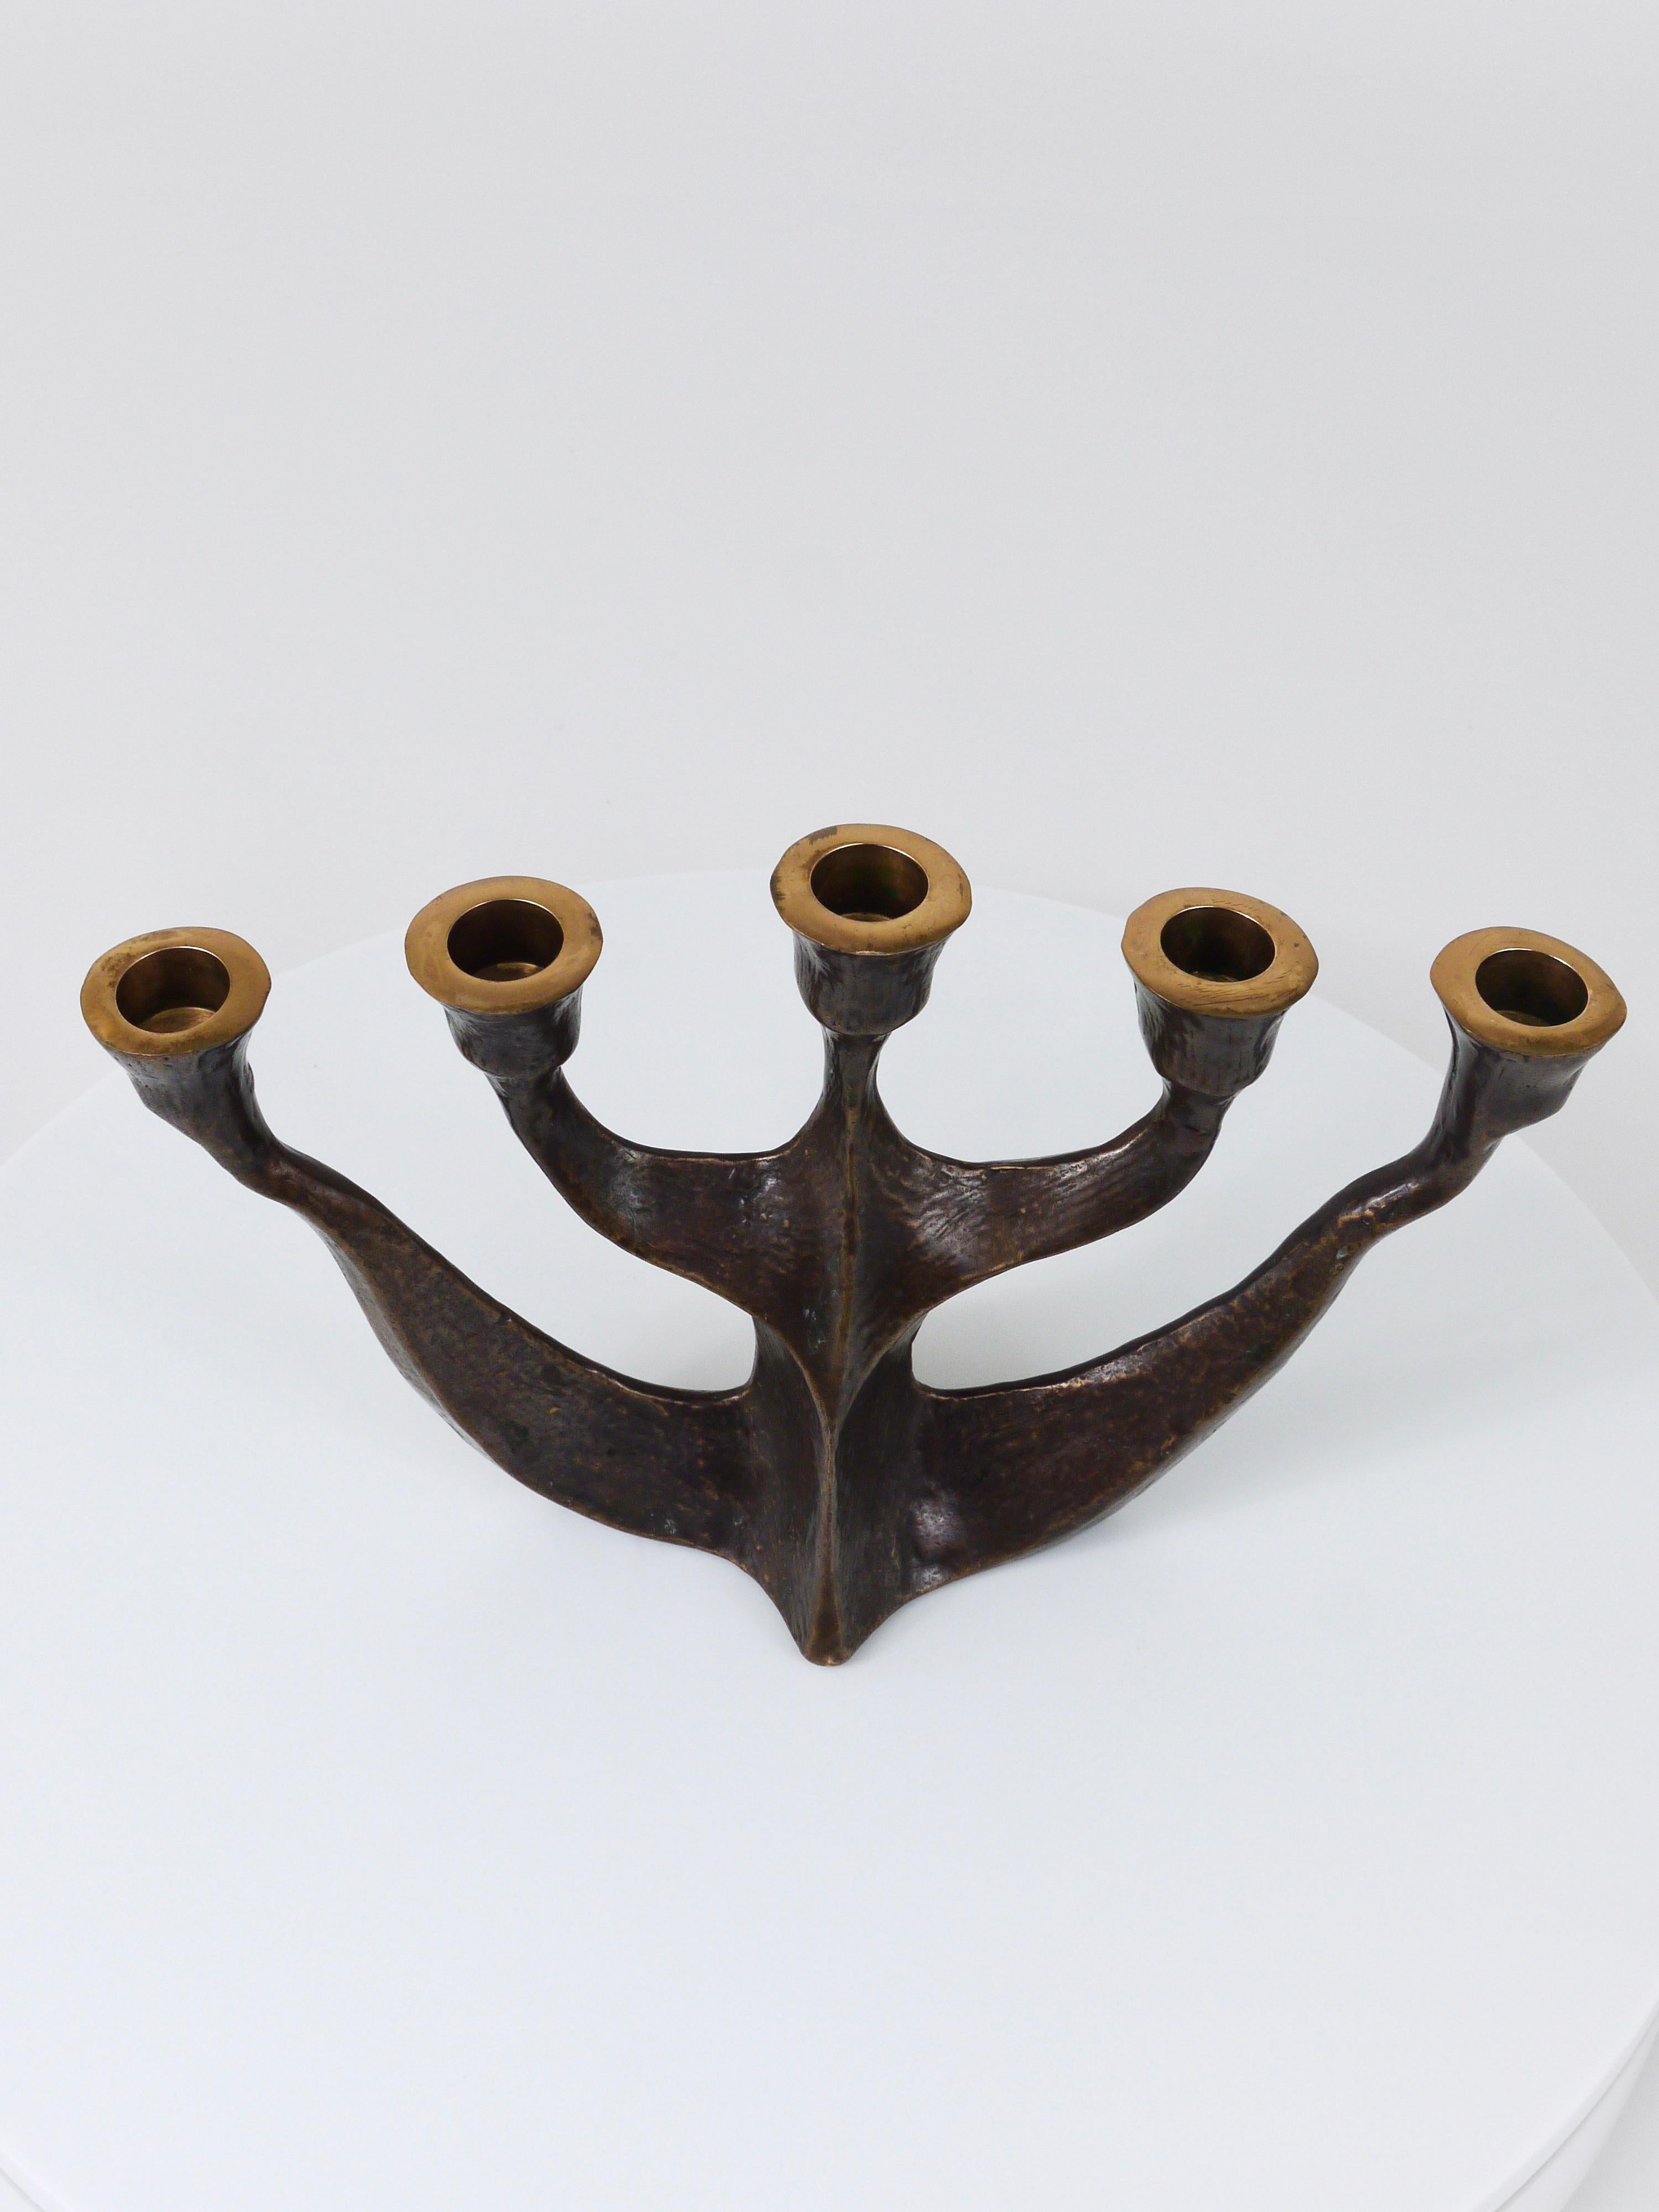 Up to Two Midcentury Brutalist Bronze Candleholders by Michael Harjes, 1960s For Sale 10